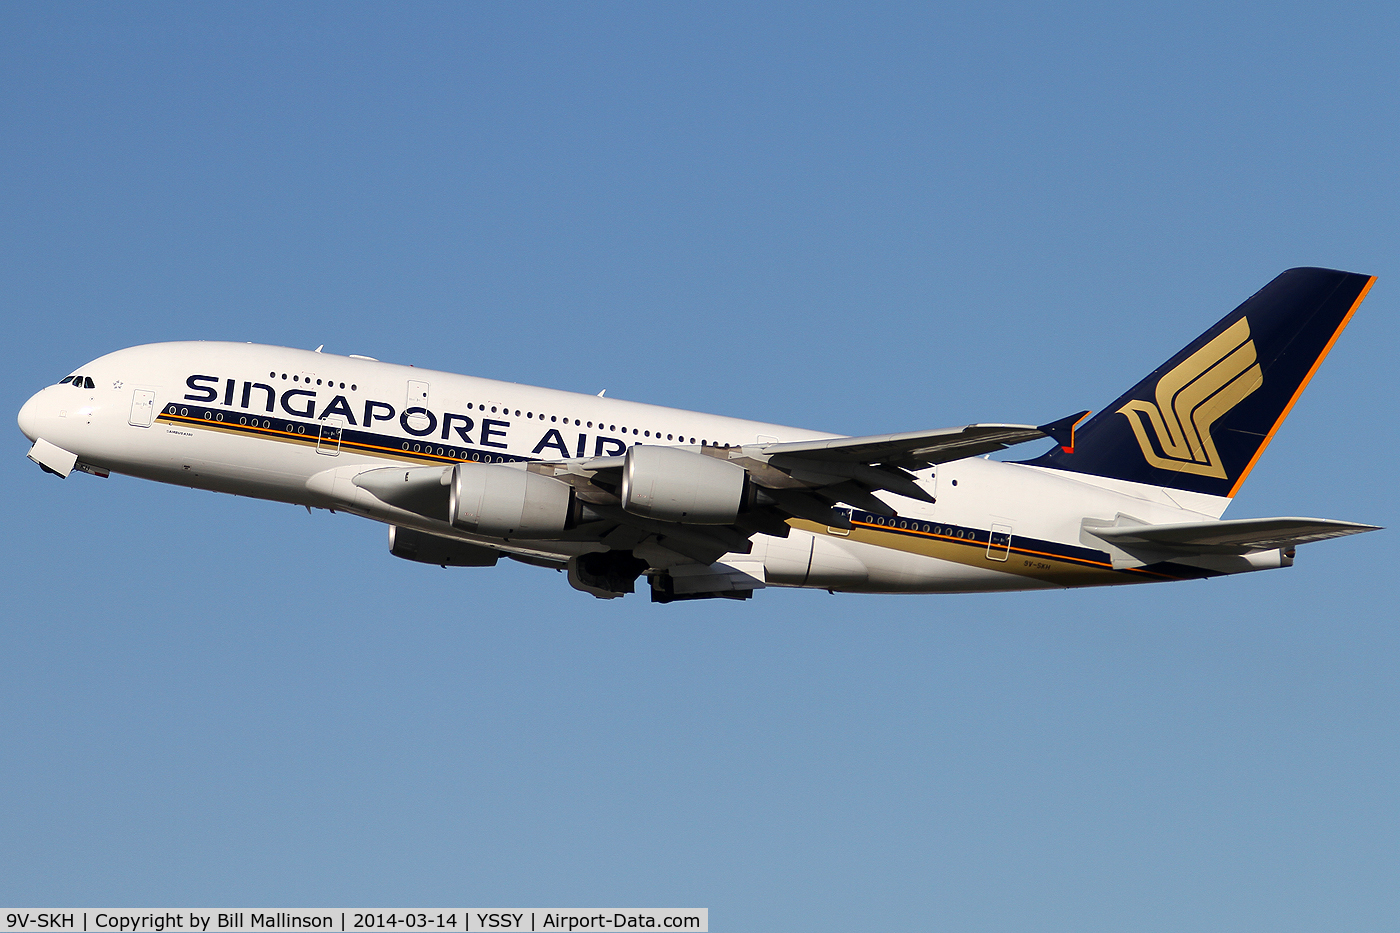 9V-SKH, 2008 Airbus A380-841 C/N 021, away from 34L